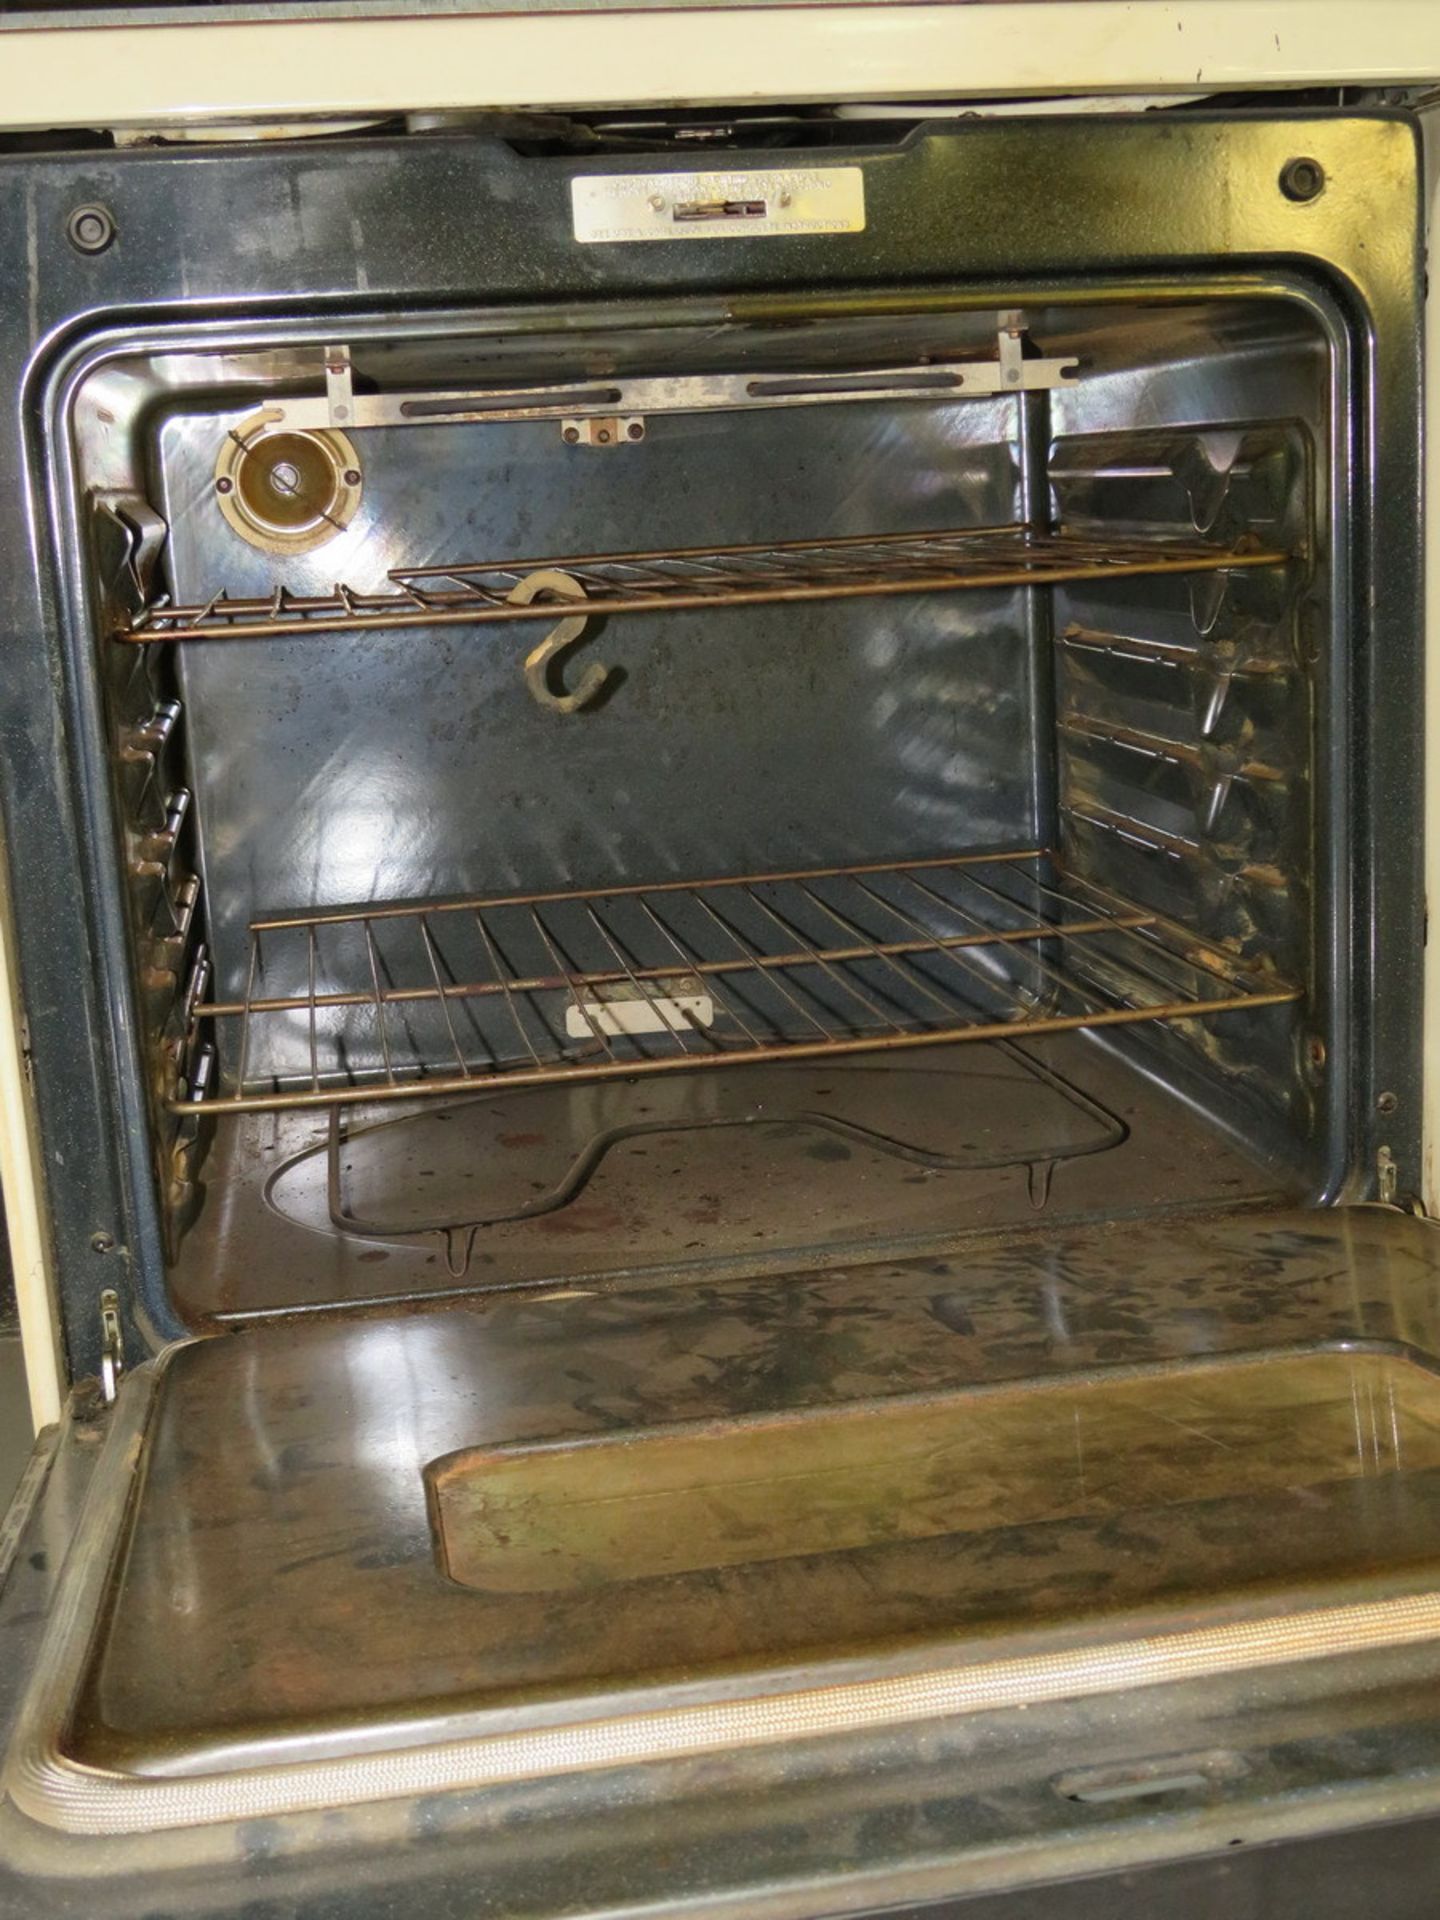 GE Spectra Electric Range with Oven - Image 4 of 5